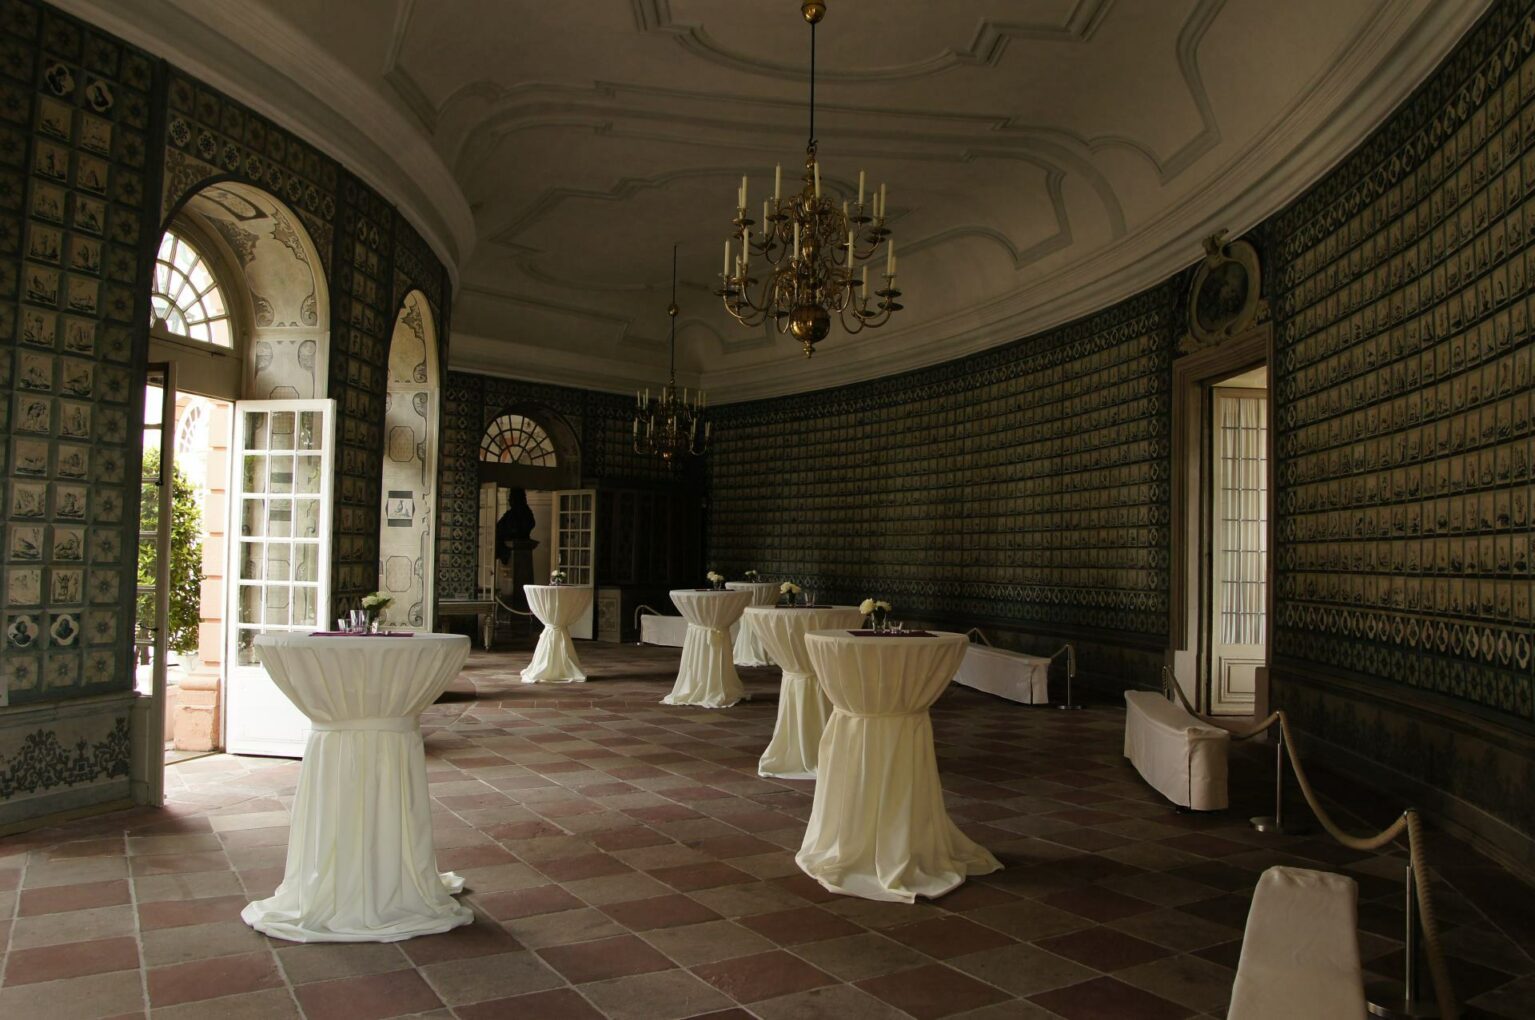 Bar tables in the Upper Orangery